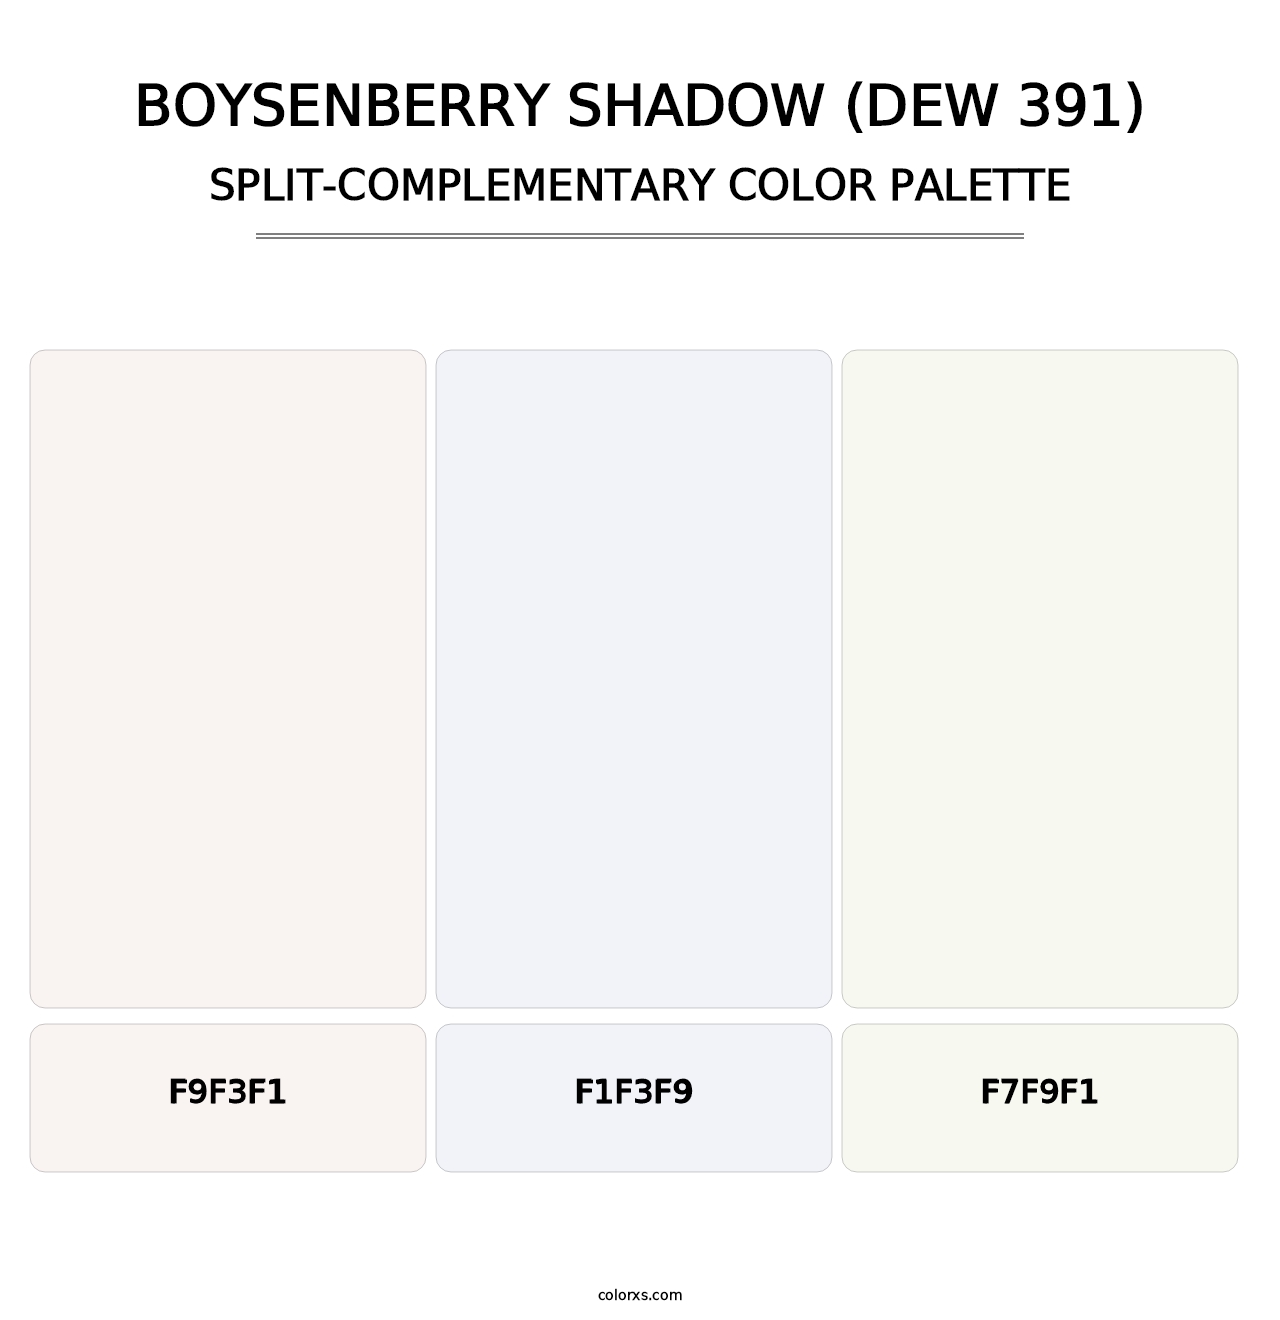 Boysenberry Shadow (DEW 391) - Split-Complementary Color Palette